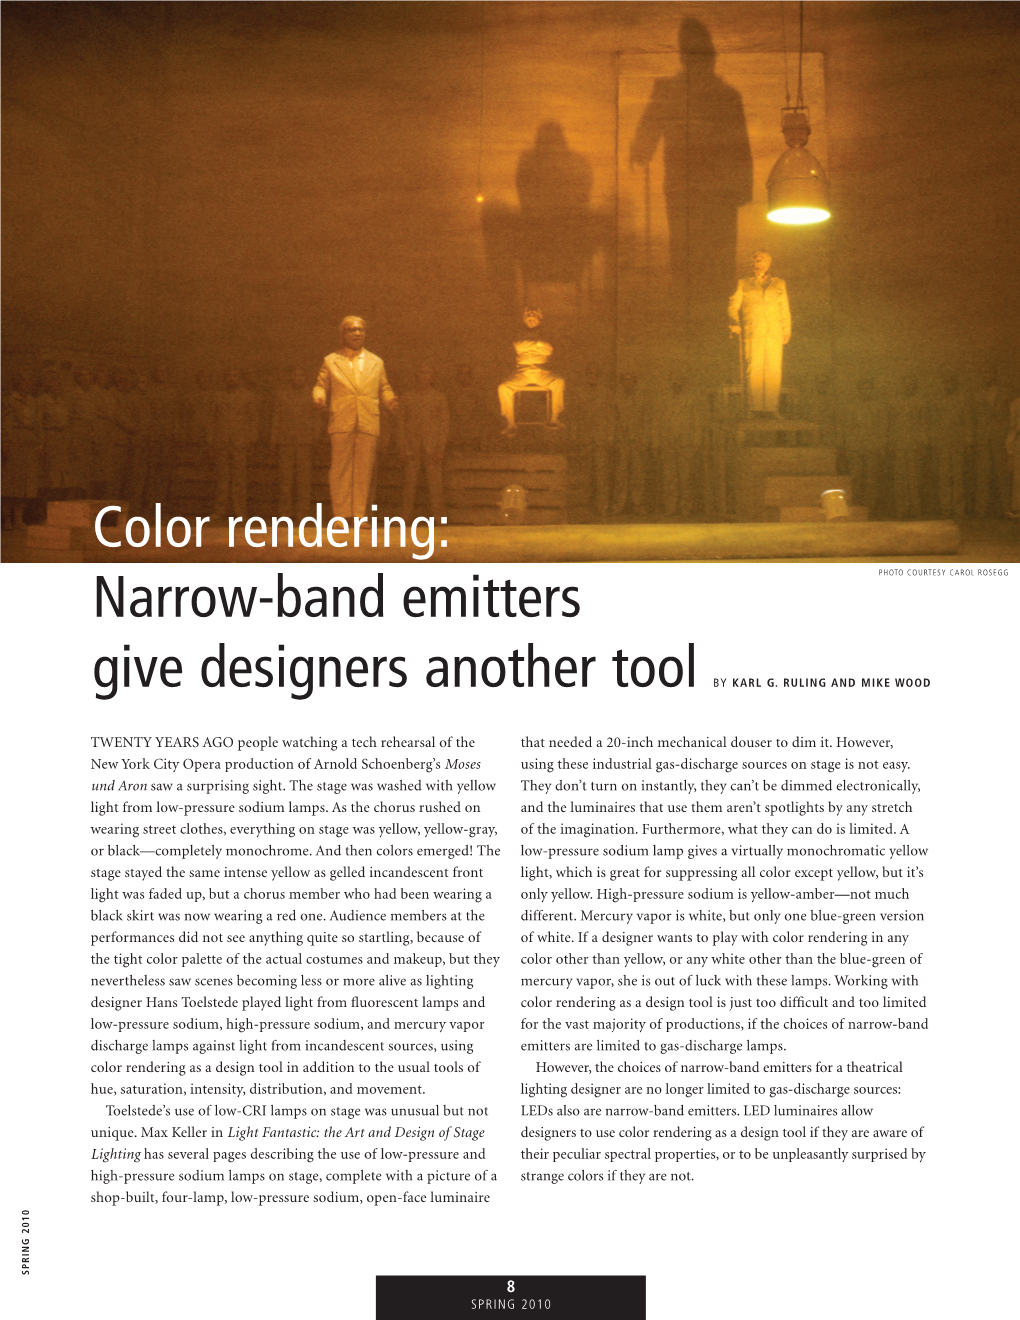 Color Rendering: Narrow-Band Emitters Give Designers Another Tool